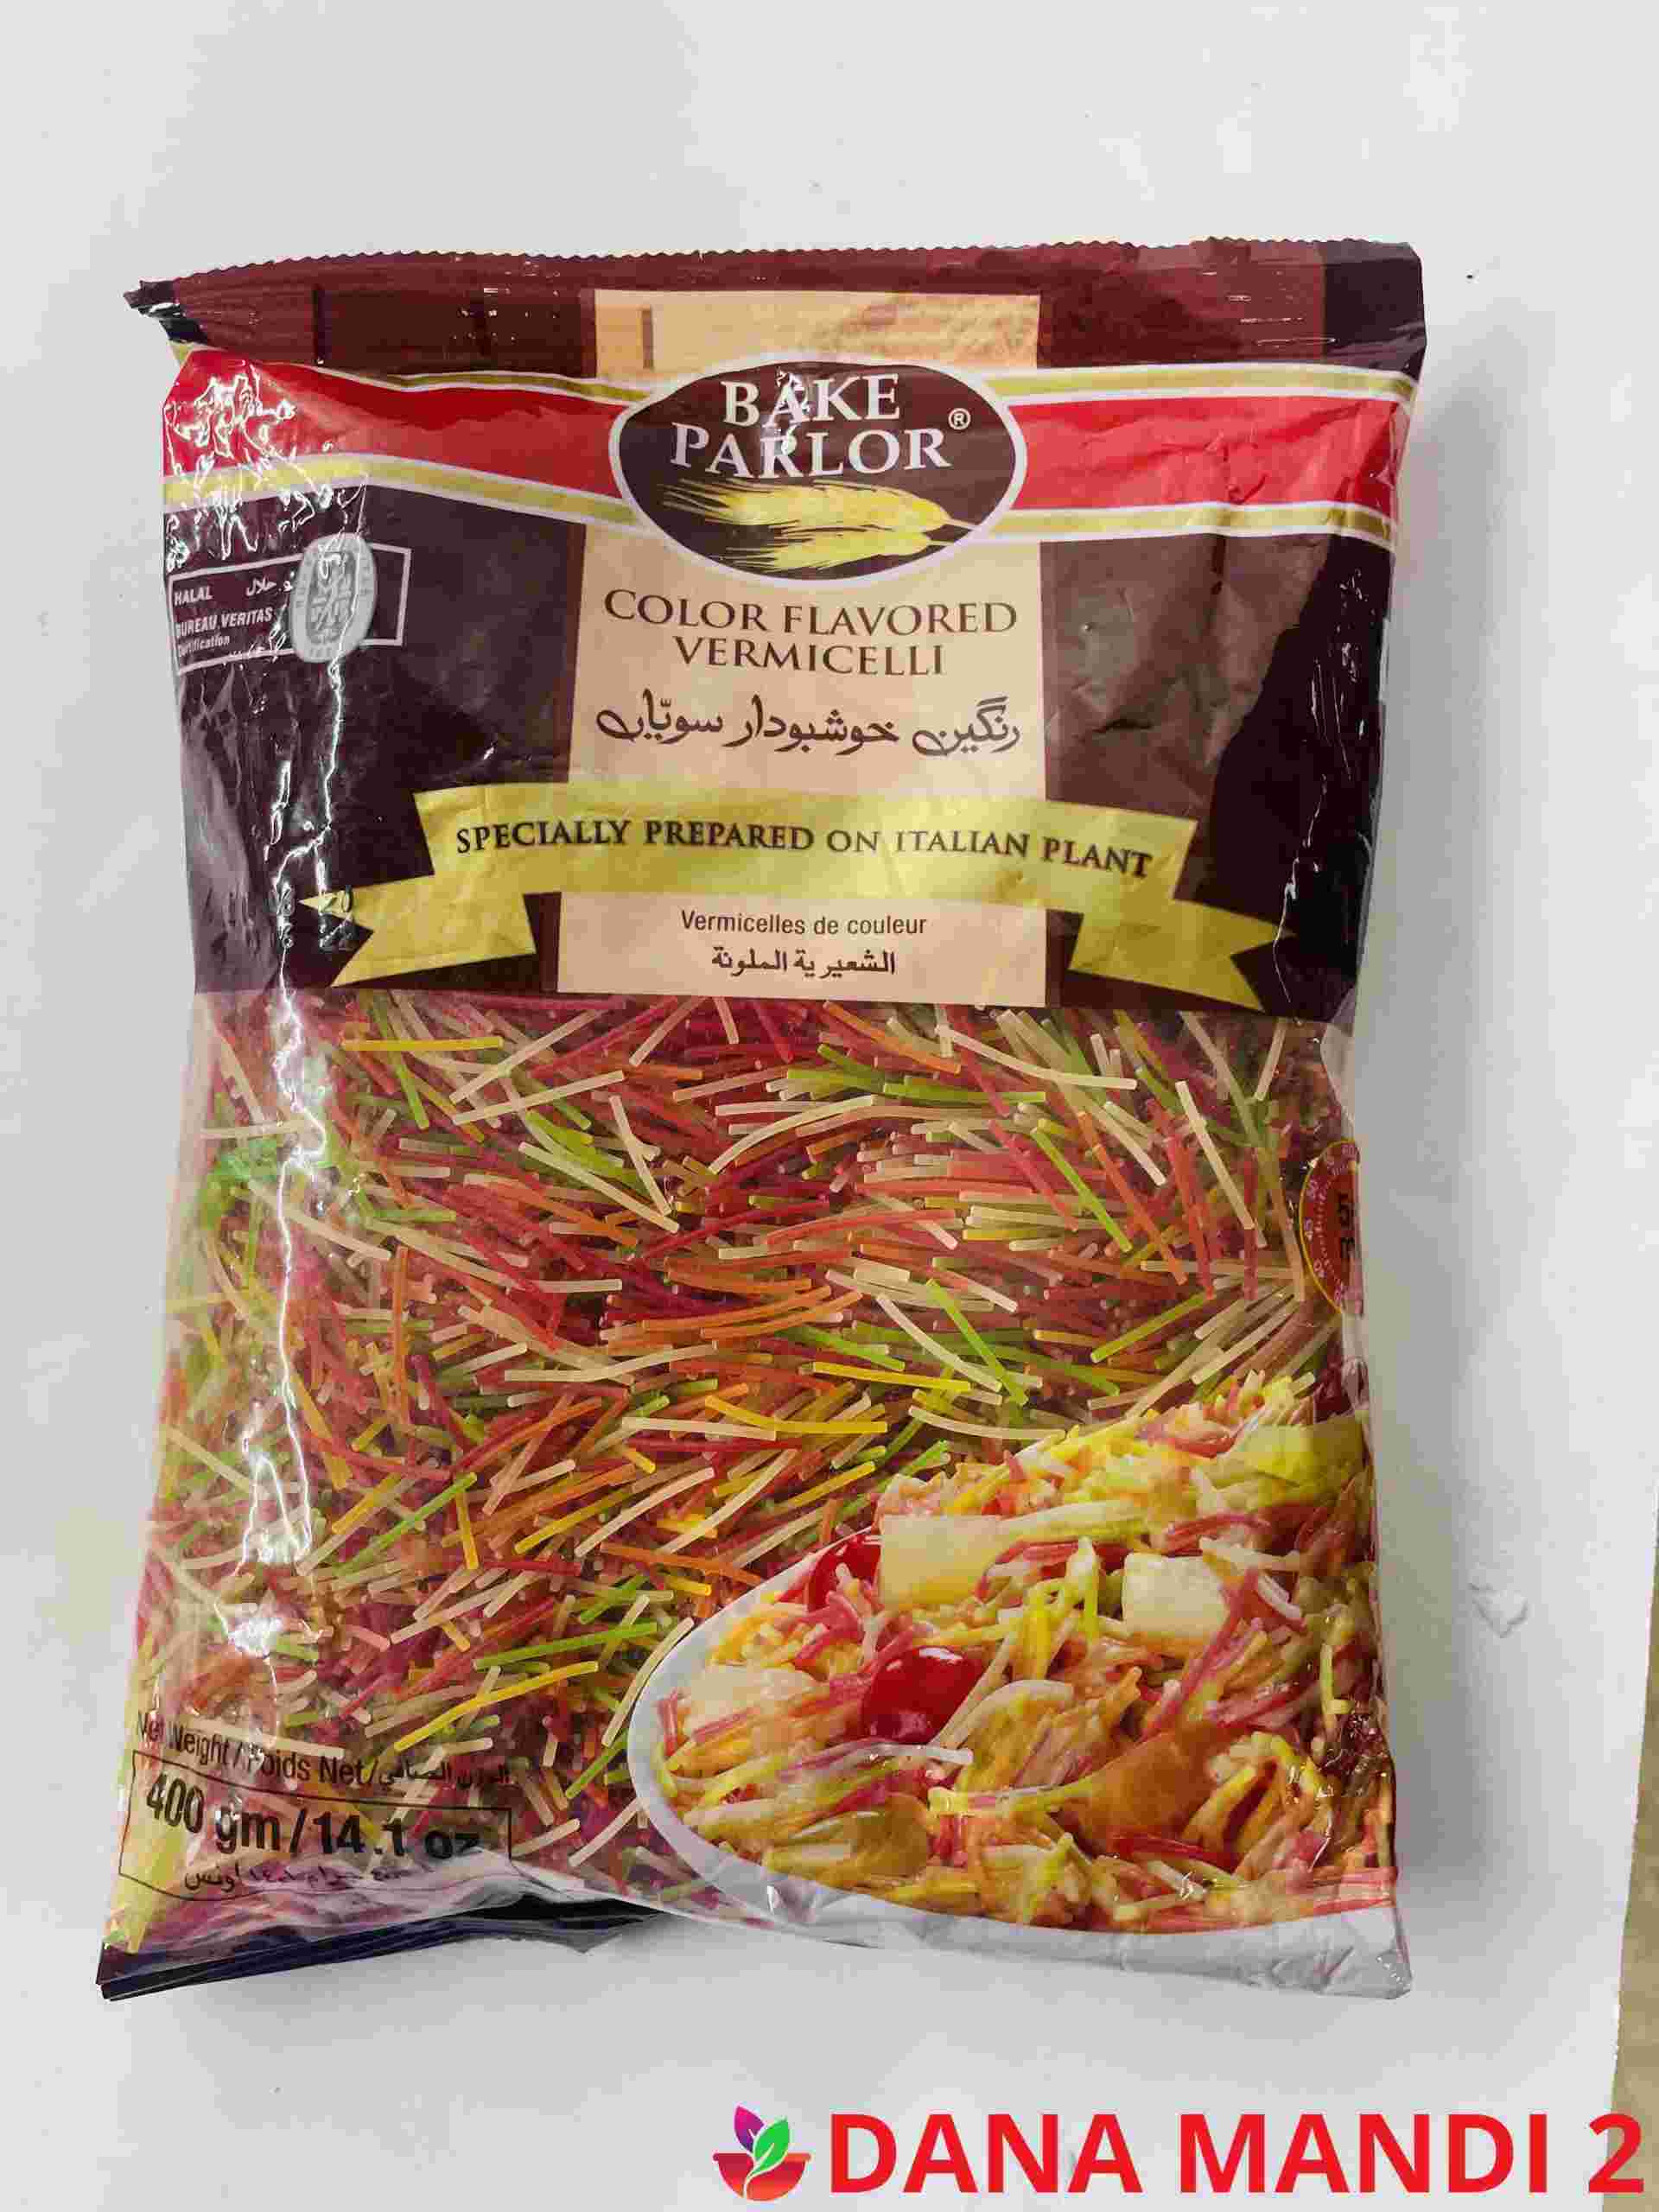 BAKE PARLOR Color Flavored Vermicelli